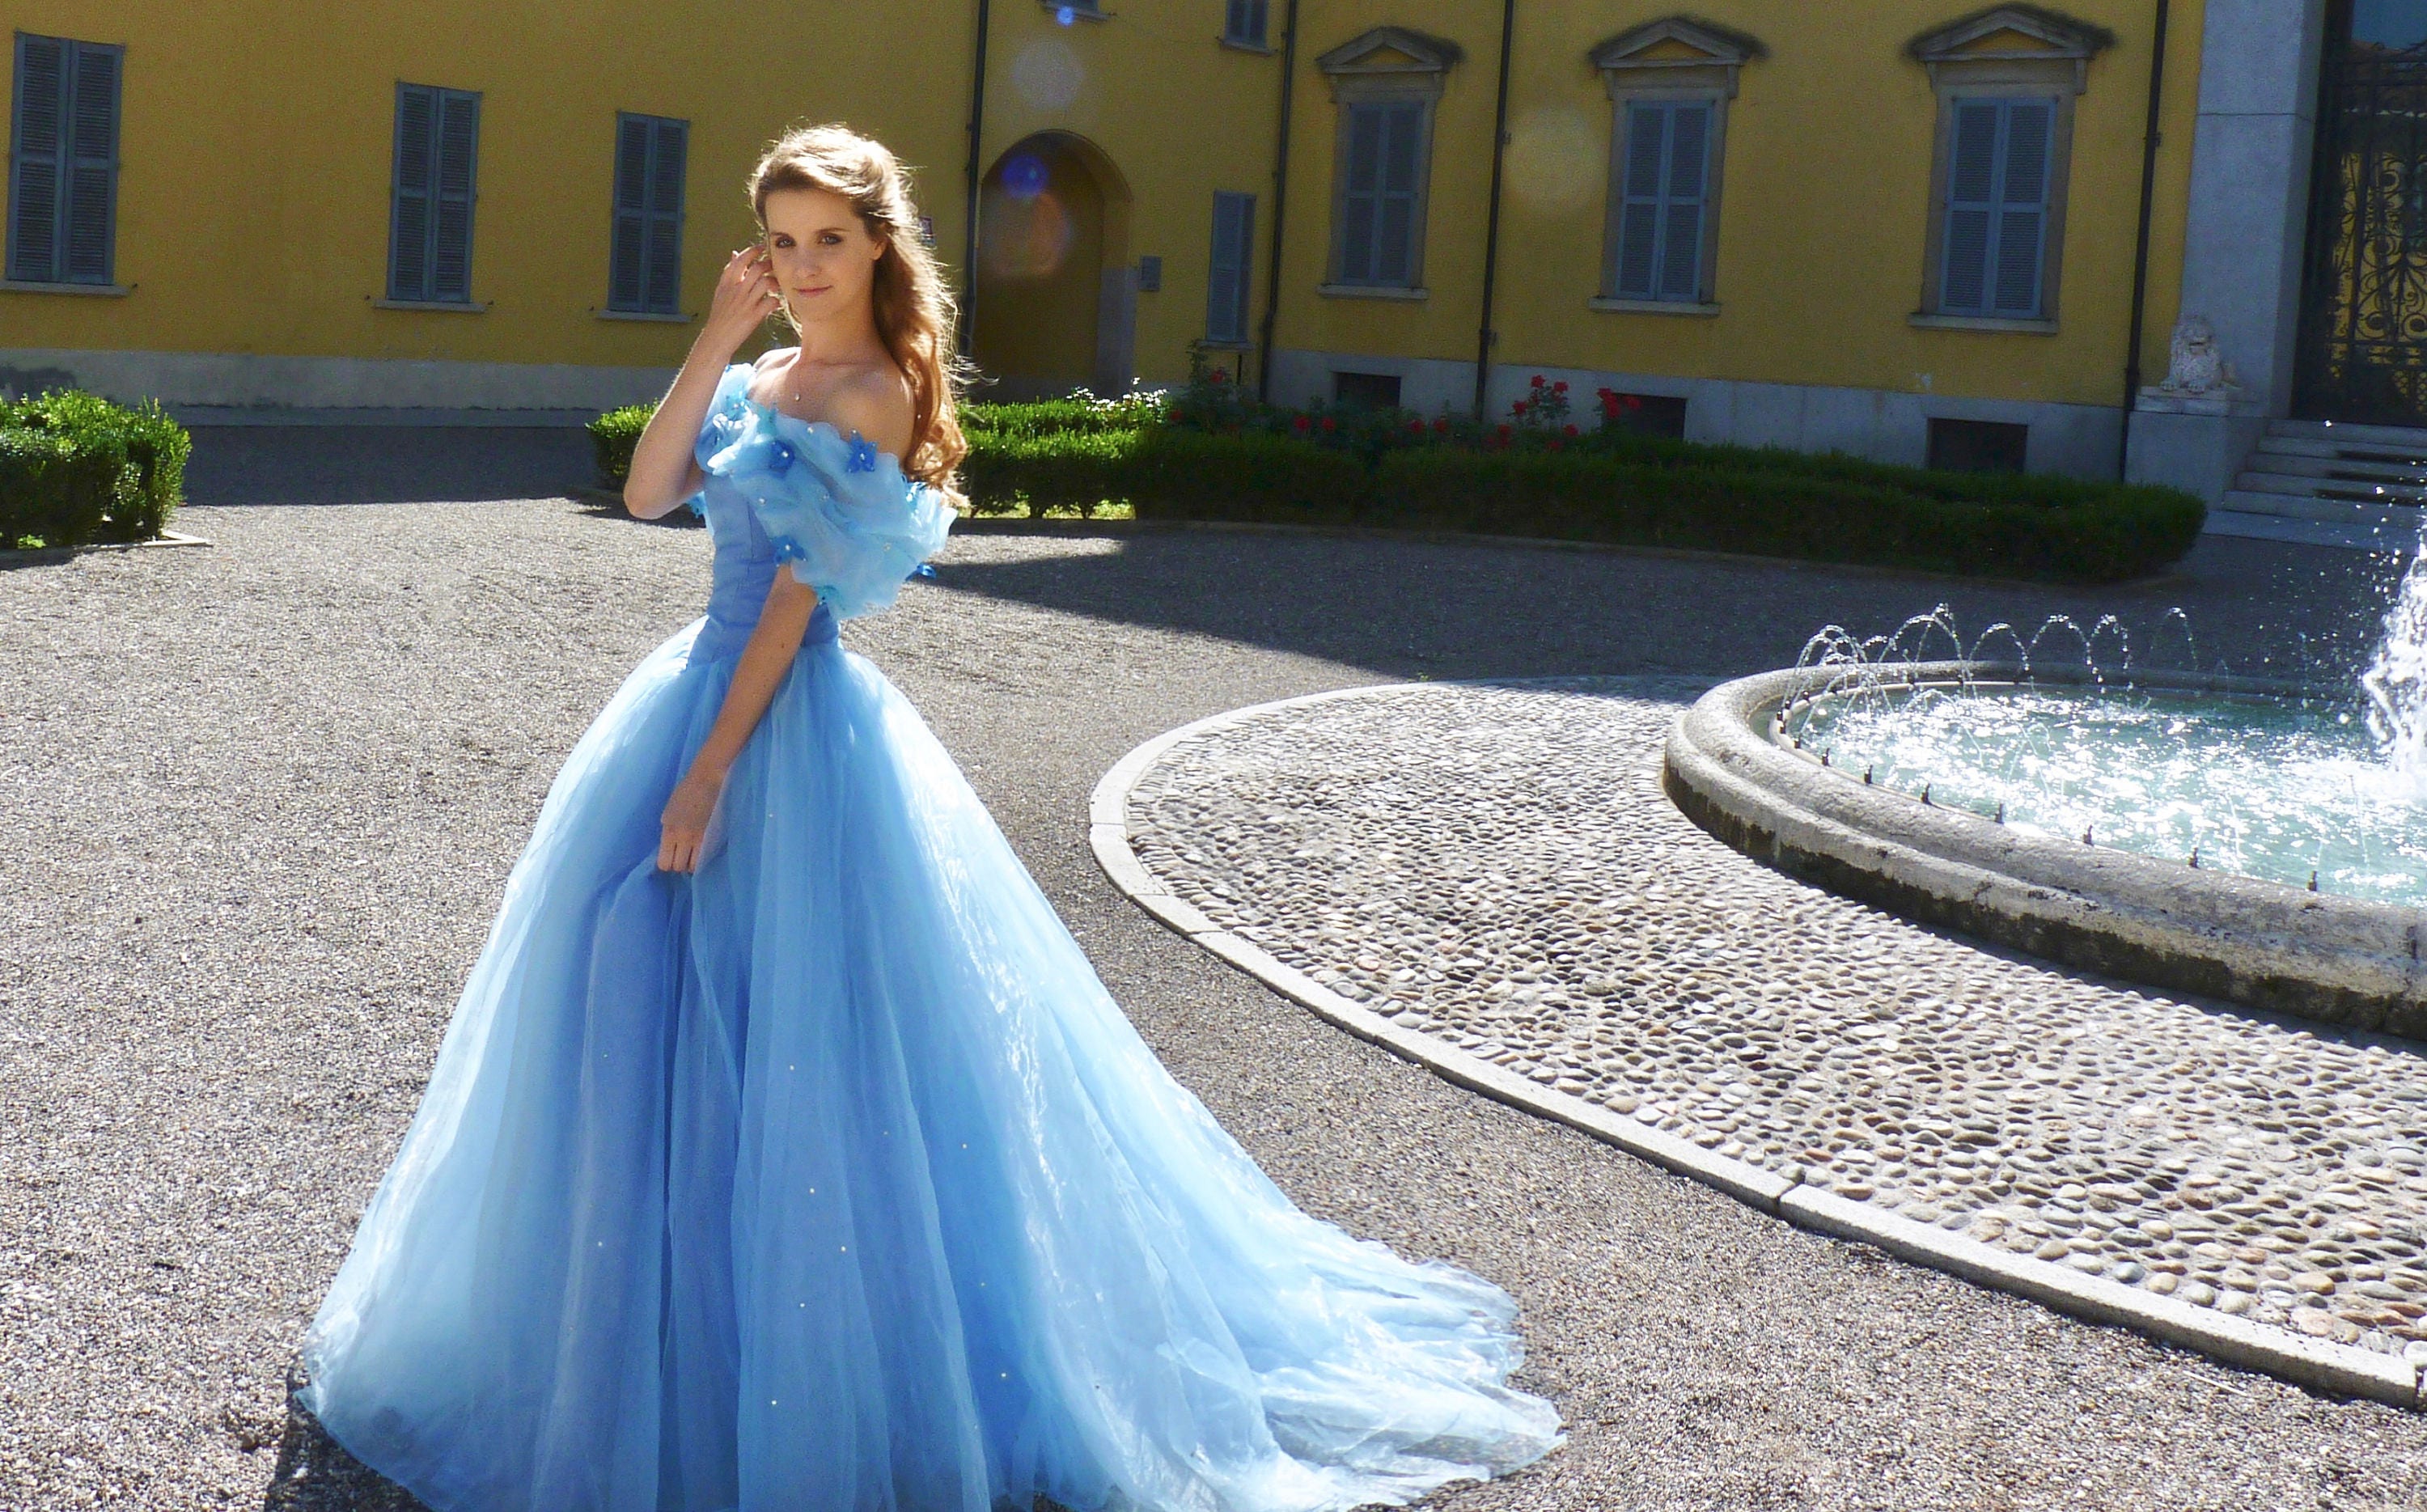 Design Your Own Cinderella Ball Gown!